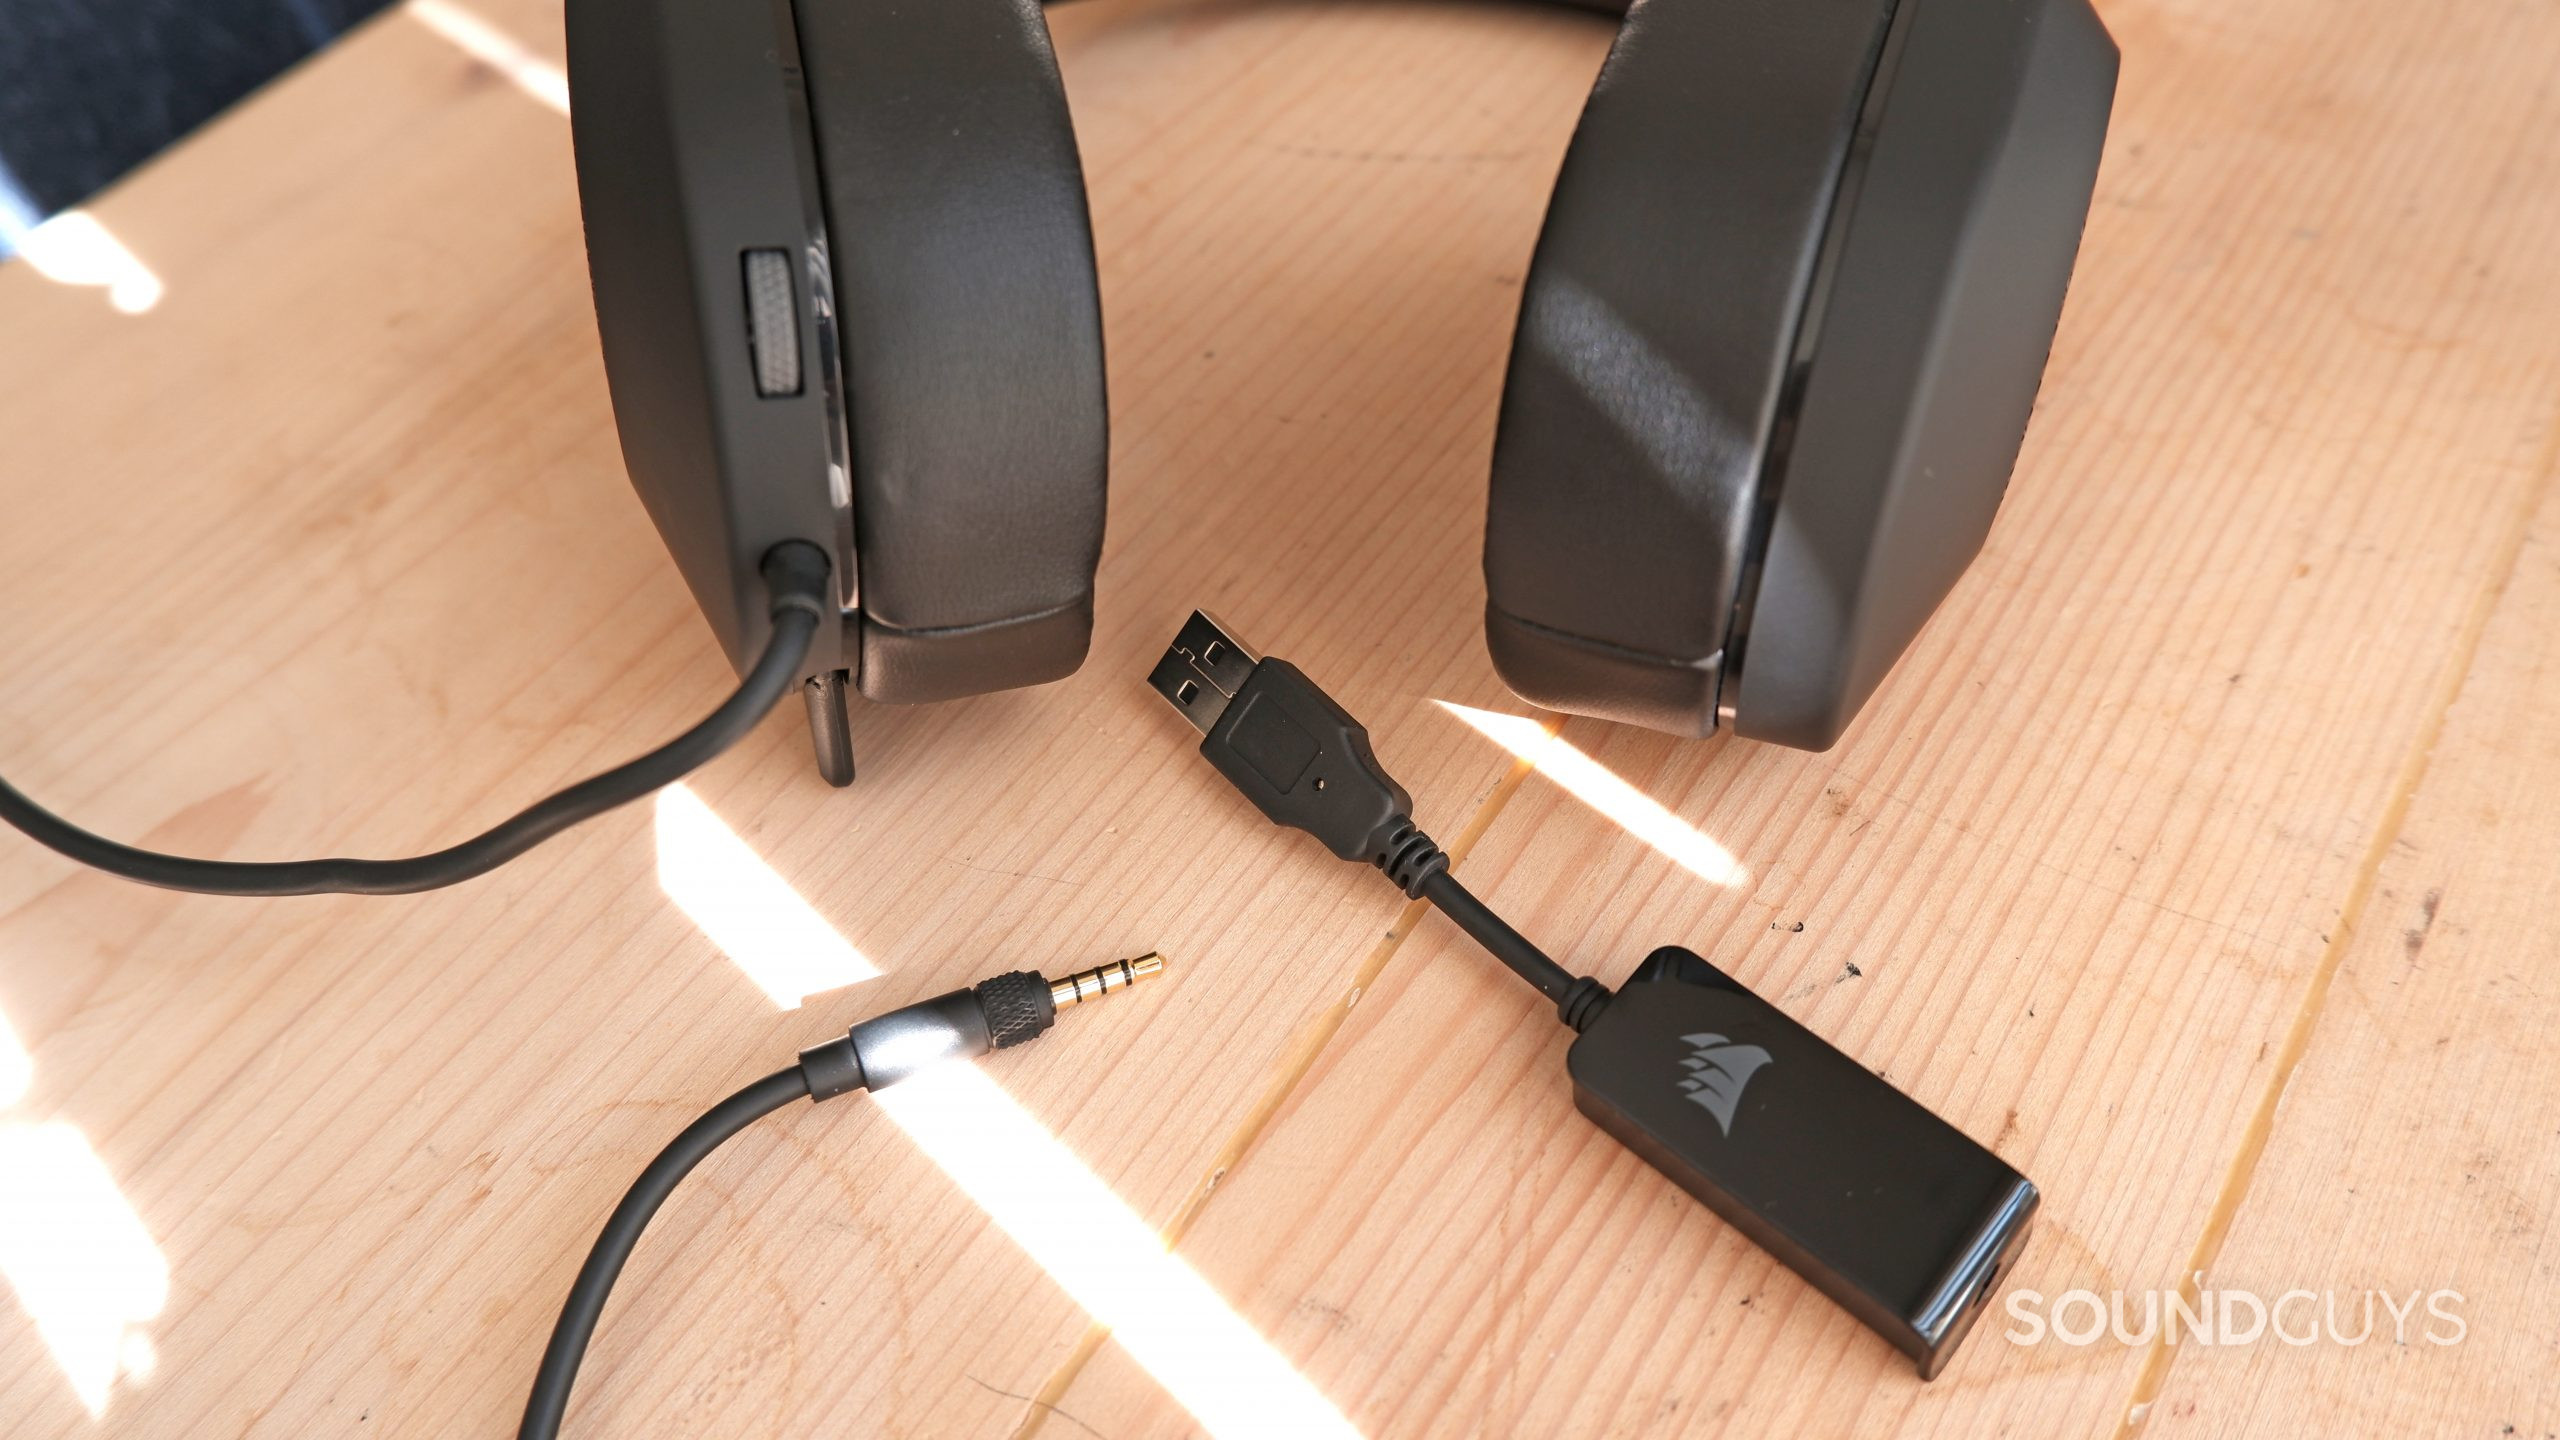 The 3.5mm TRRS cable and USB-A adapter for the Corsair HS65 Surround.